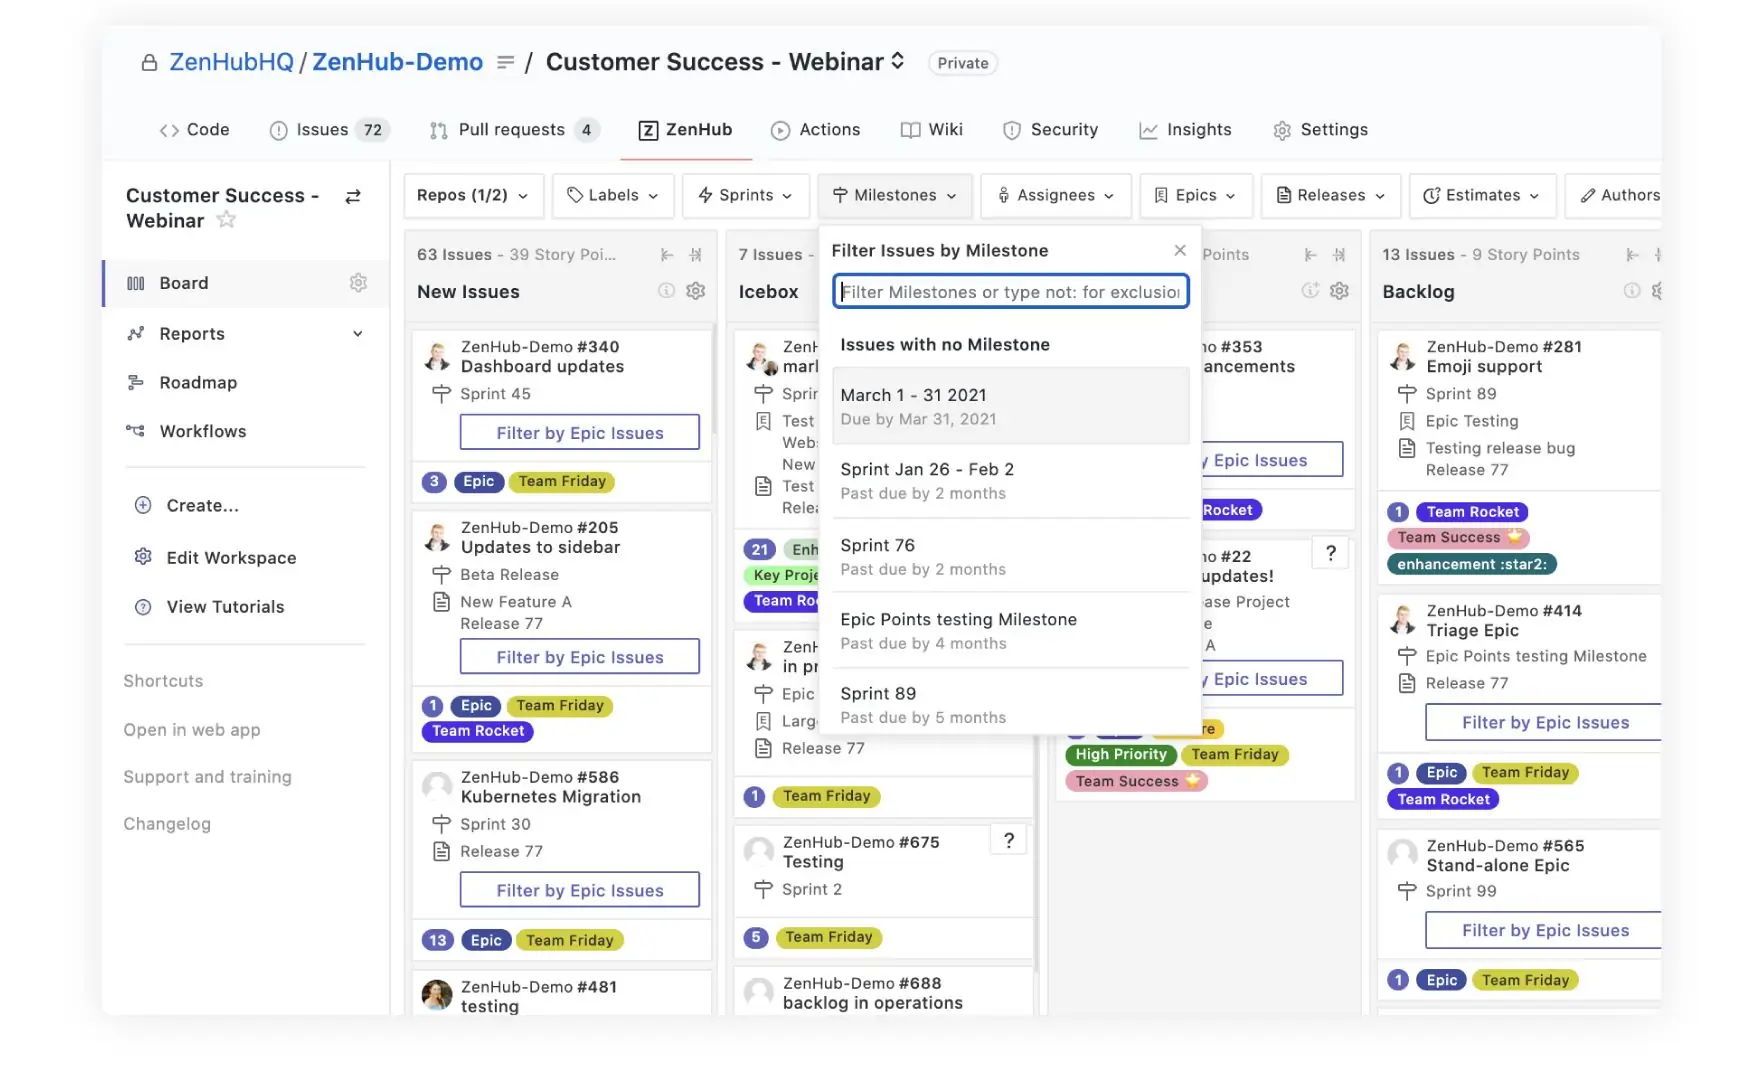 filtering issues by milestone on a customer success Kanban board